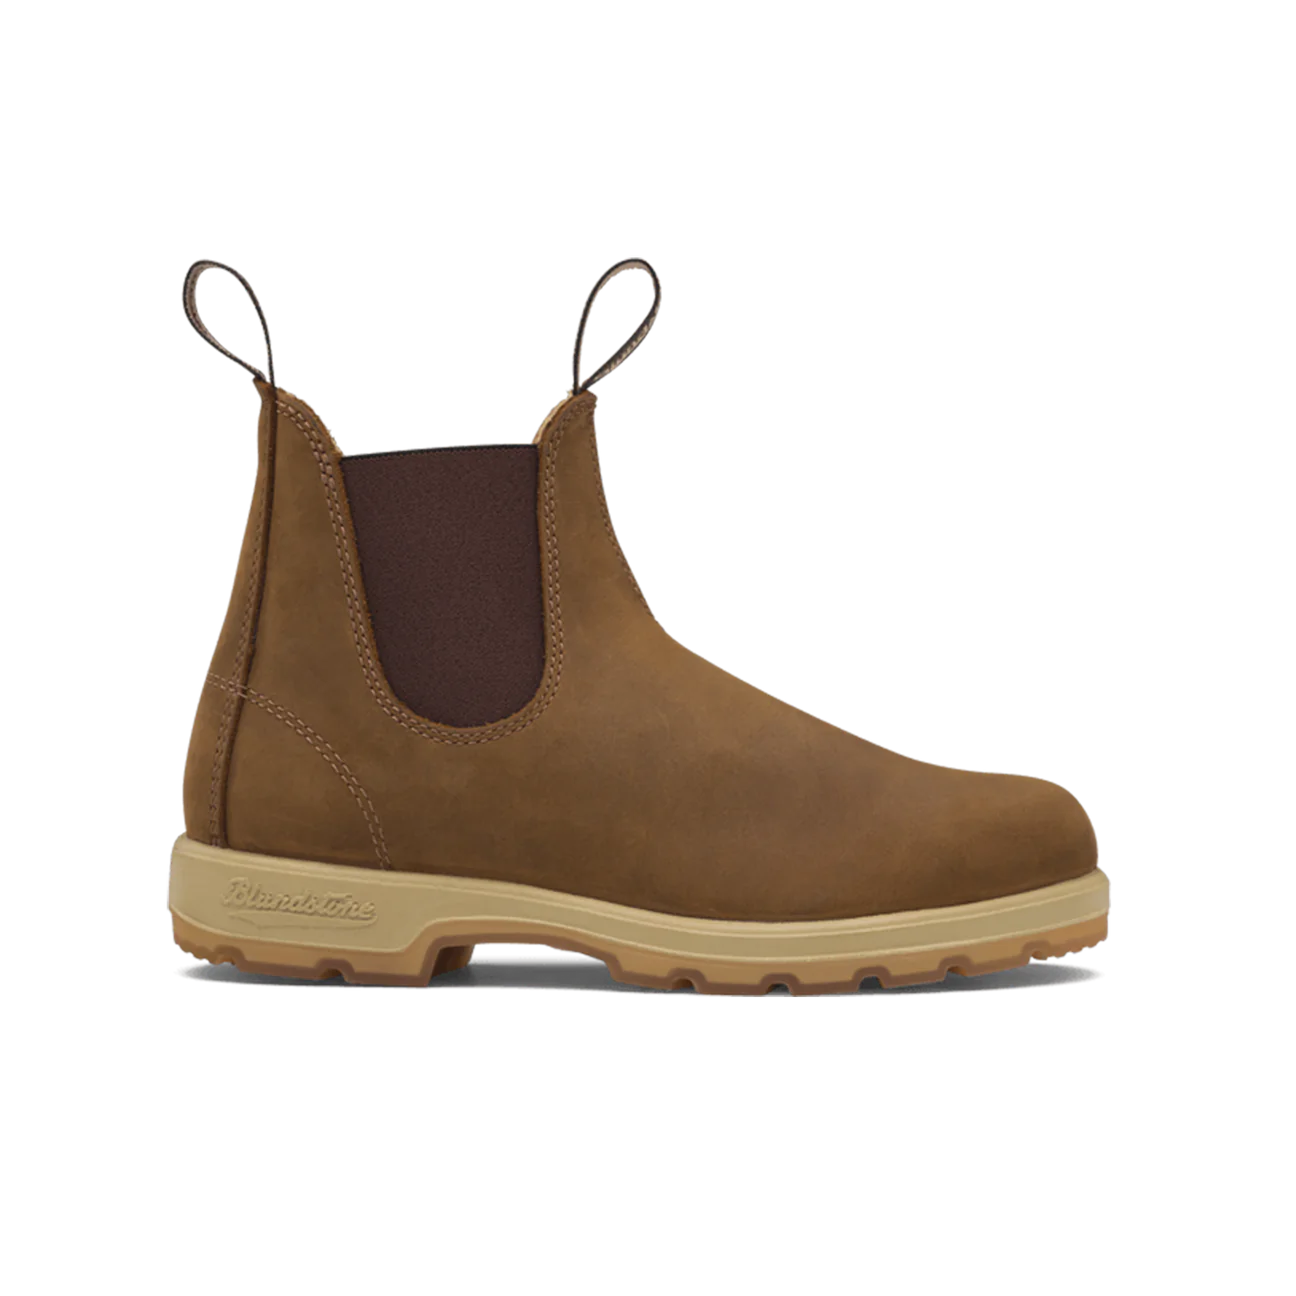 Blundstone 1320 Classic Boots